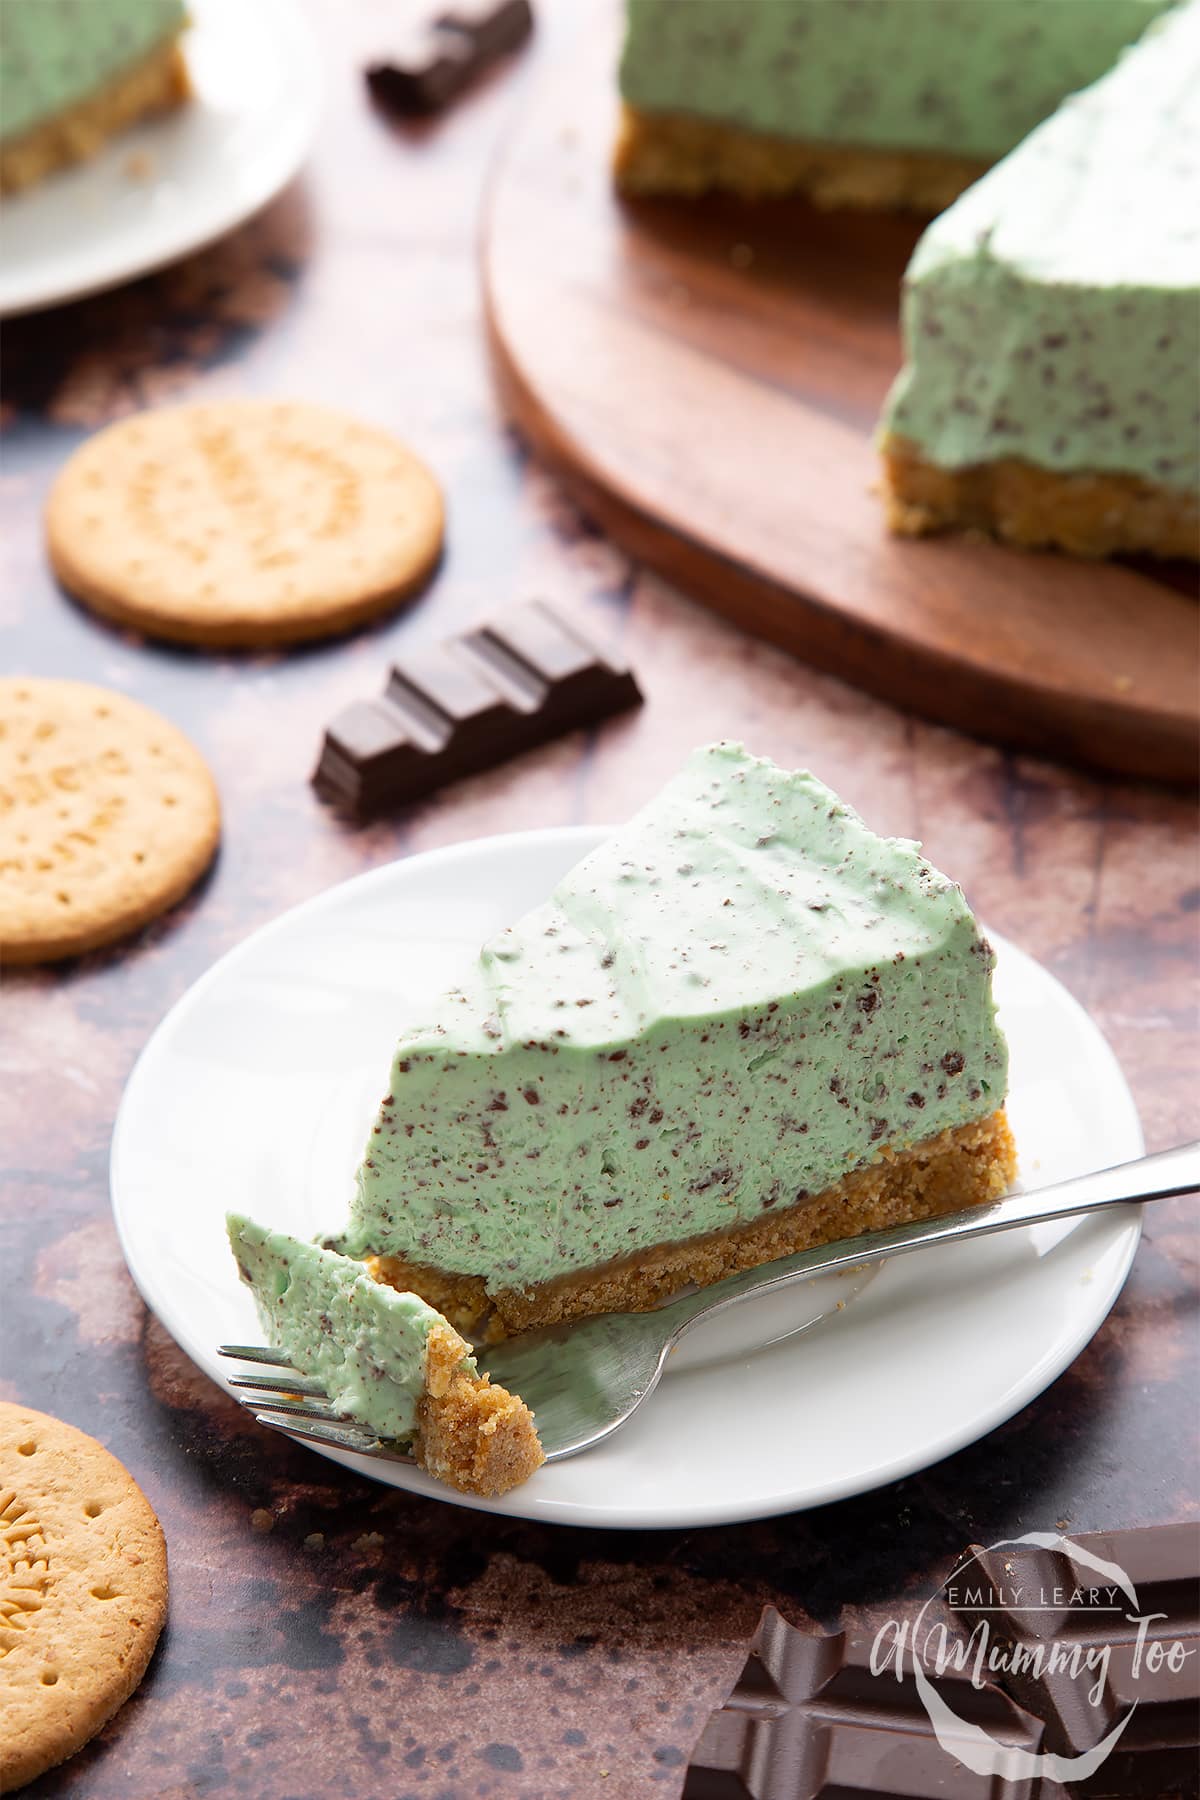 A slice of no bake mint cheesecake with a biscuit base on a white plate. A fork rests on the plate with a piece of the cheesecake on it.